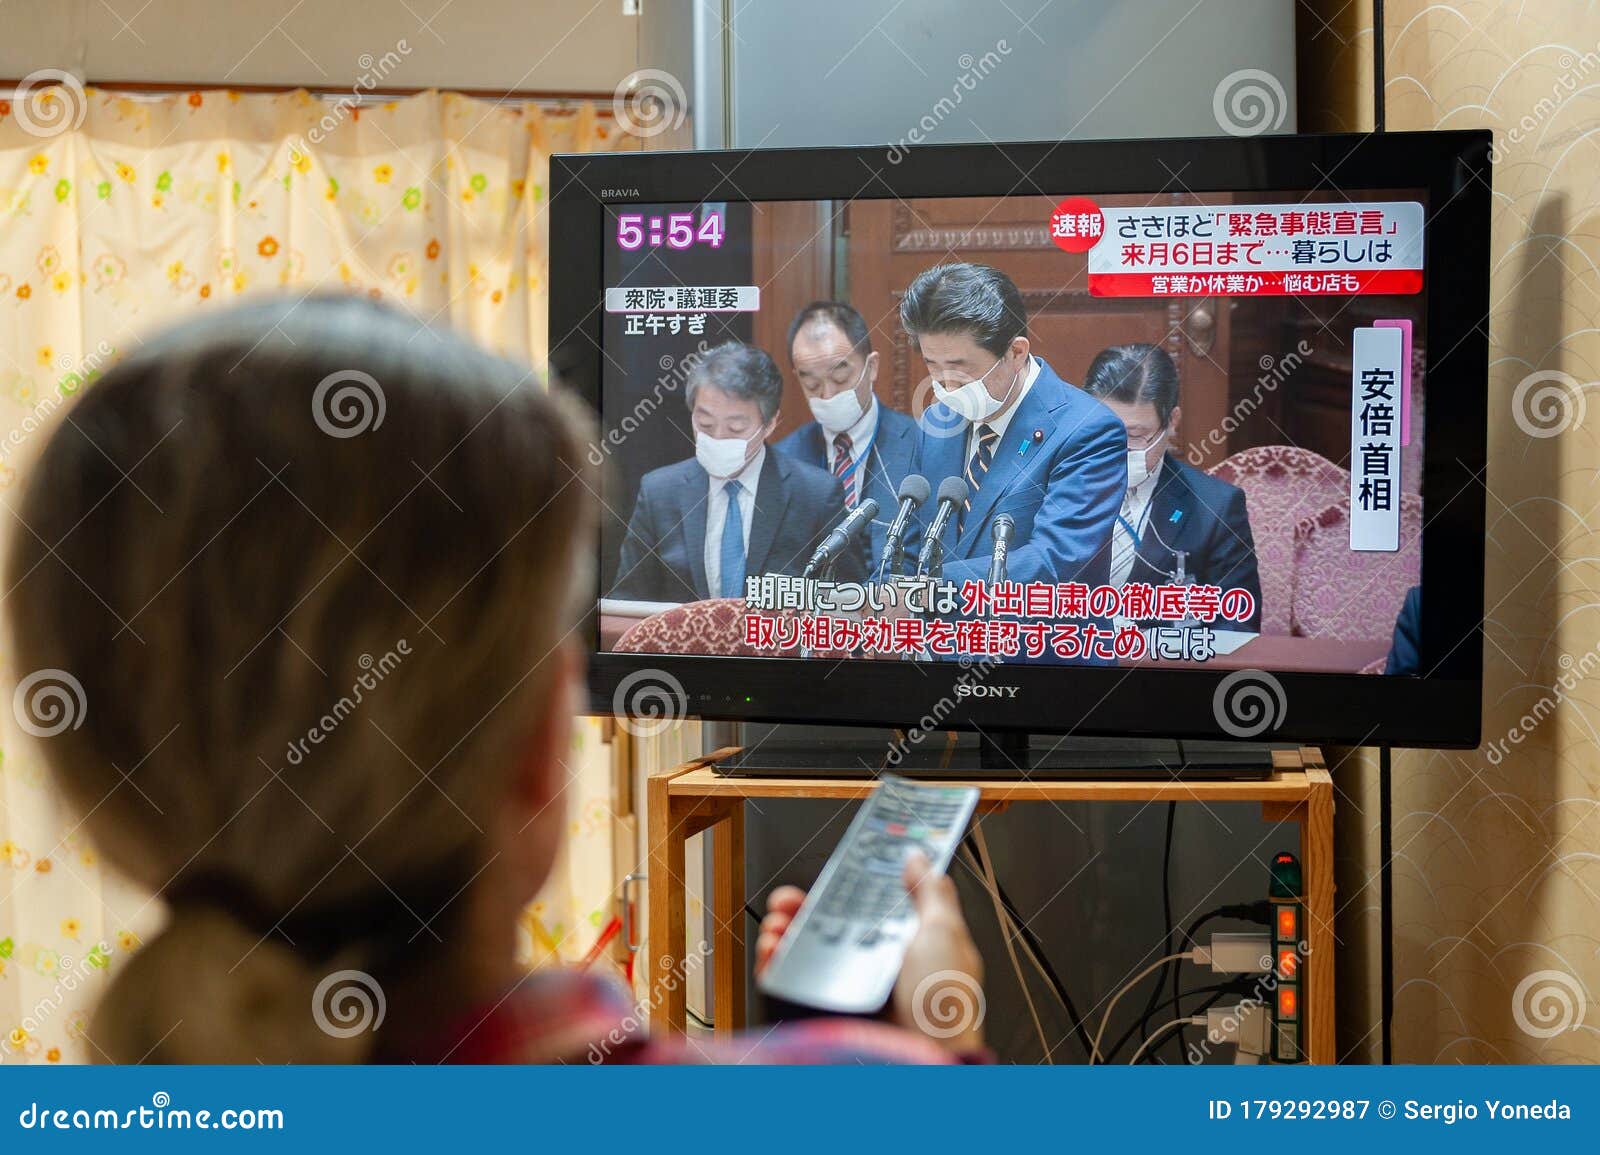 A Woman Watches Japan Pm Shinzo Abe On Tv About The Declaration Of A State Of Emergency To Contain The Spread Of The Coronavirus P Editorial Photography Image Of Covid19 Pandemic